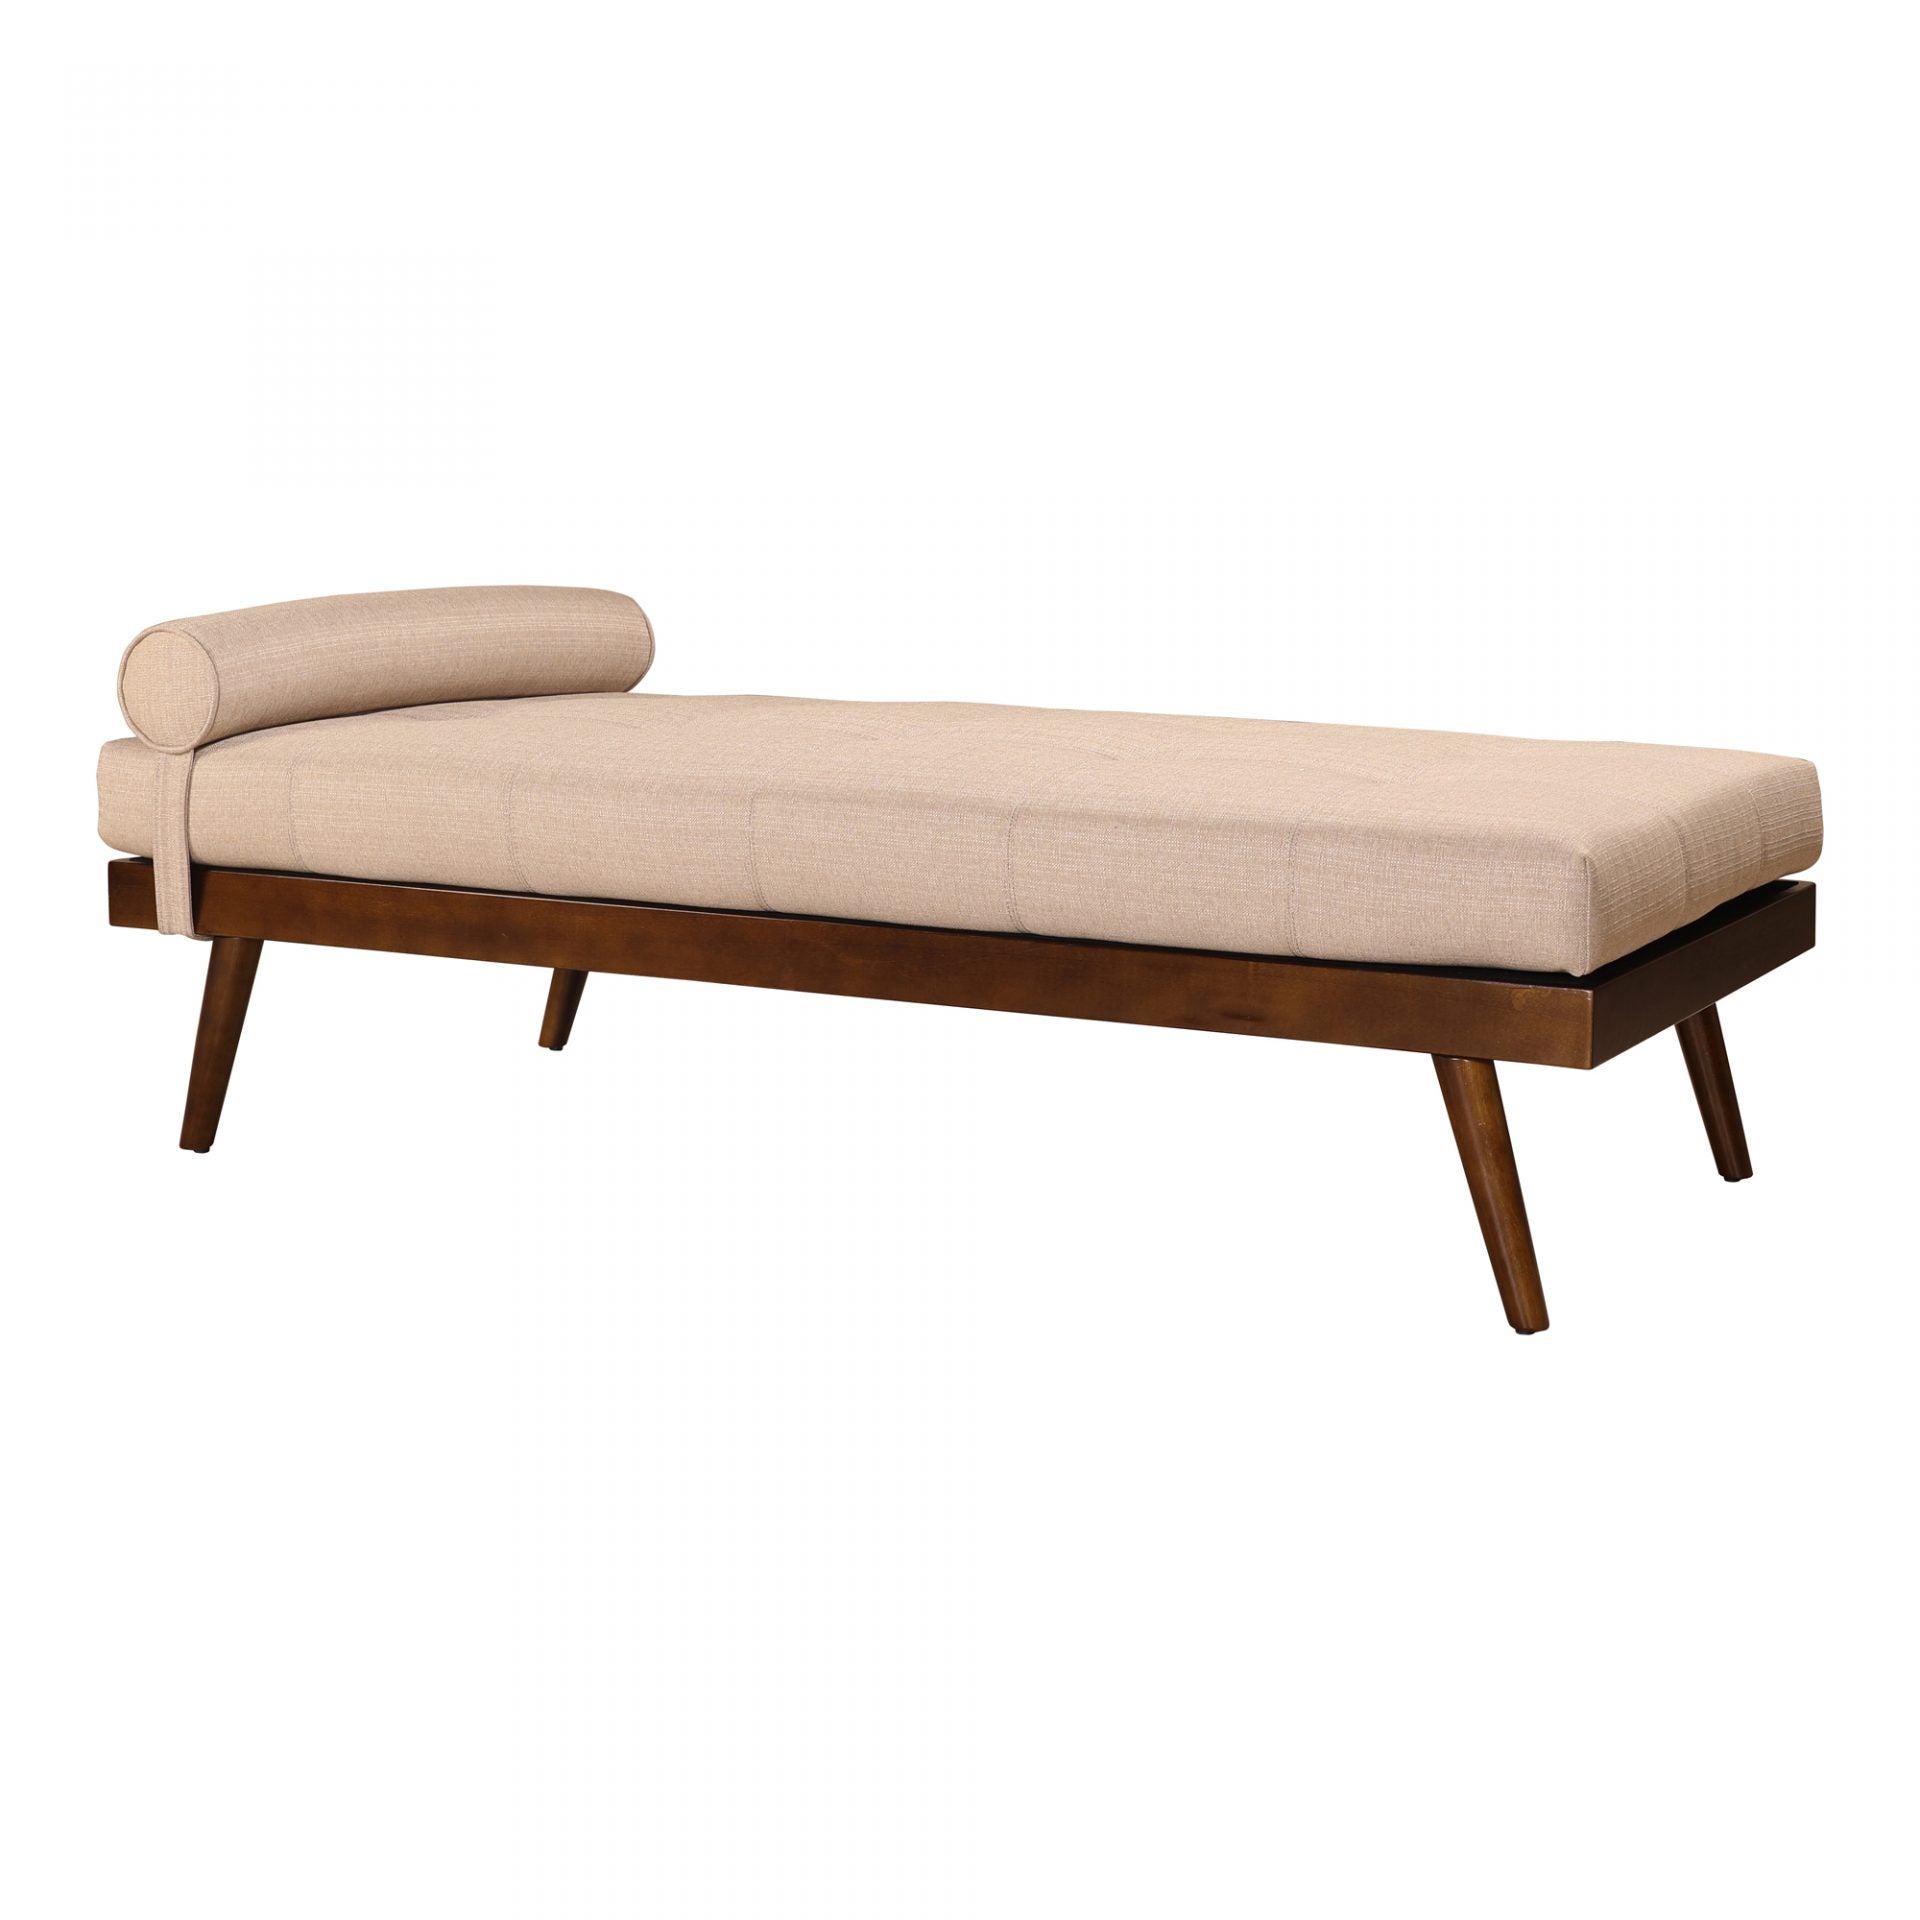 Alyssa Daybed/ Chaise Lounge - Rug & Weave